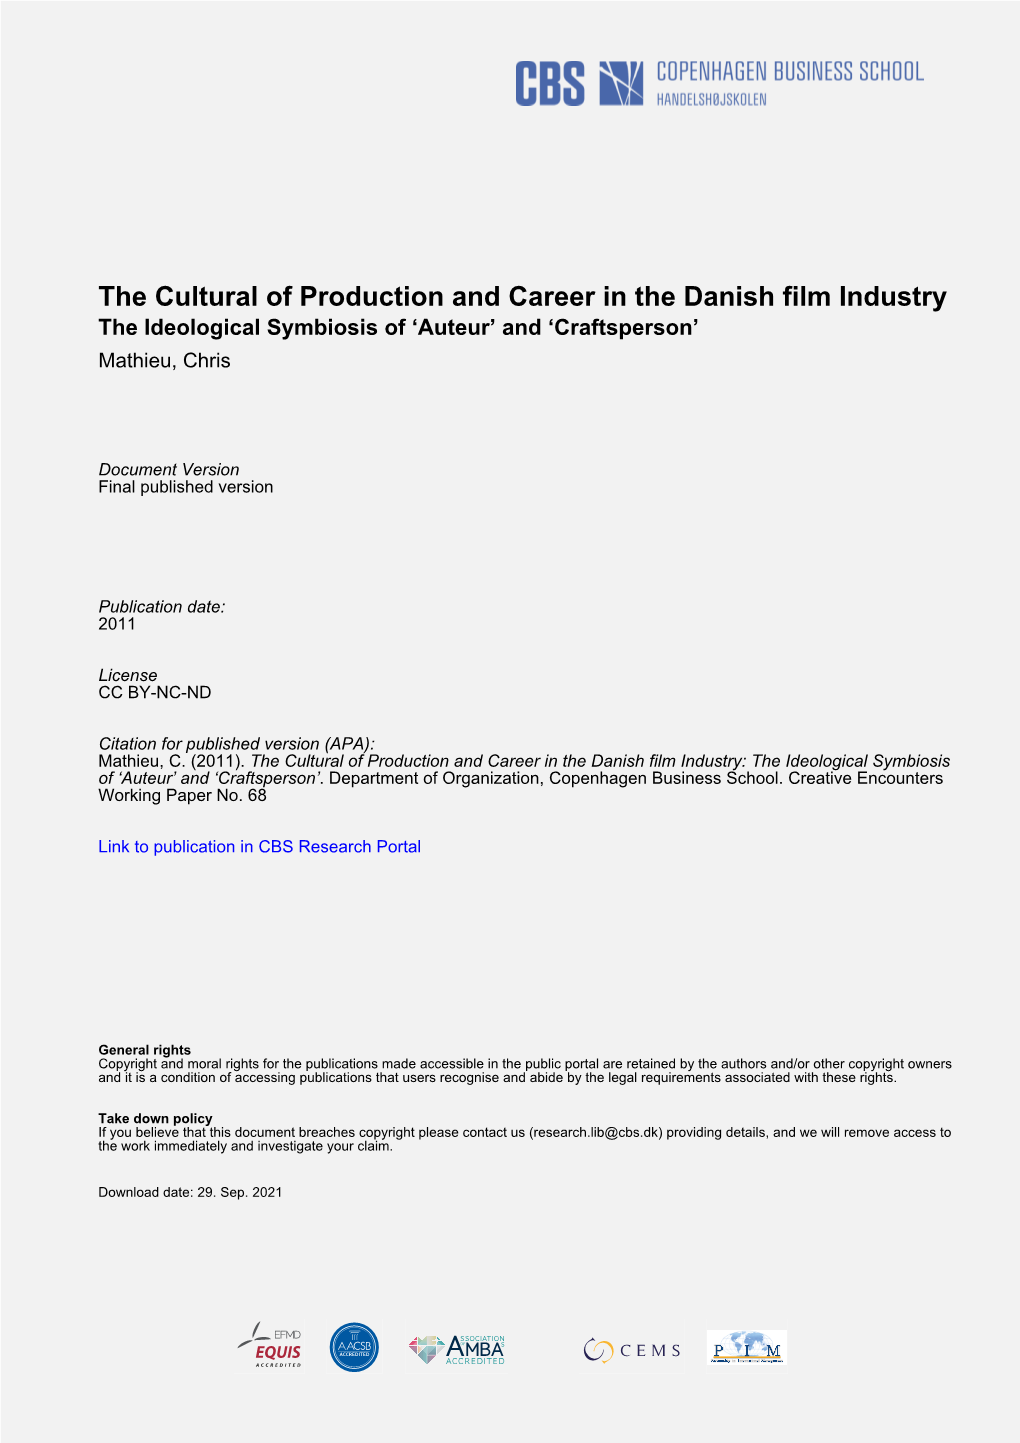 The Cultural of Production and Career in the Danish Film Industry the Ideological Symbiosis of ‘Auteur’ and ‘Craftsperson’ Mathieu, Chris